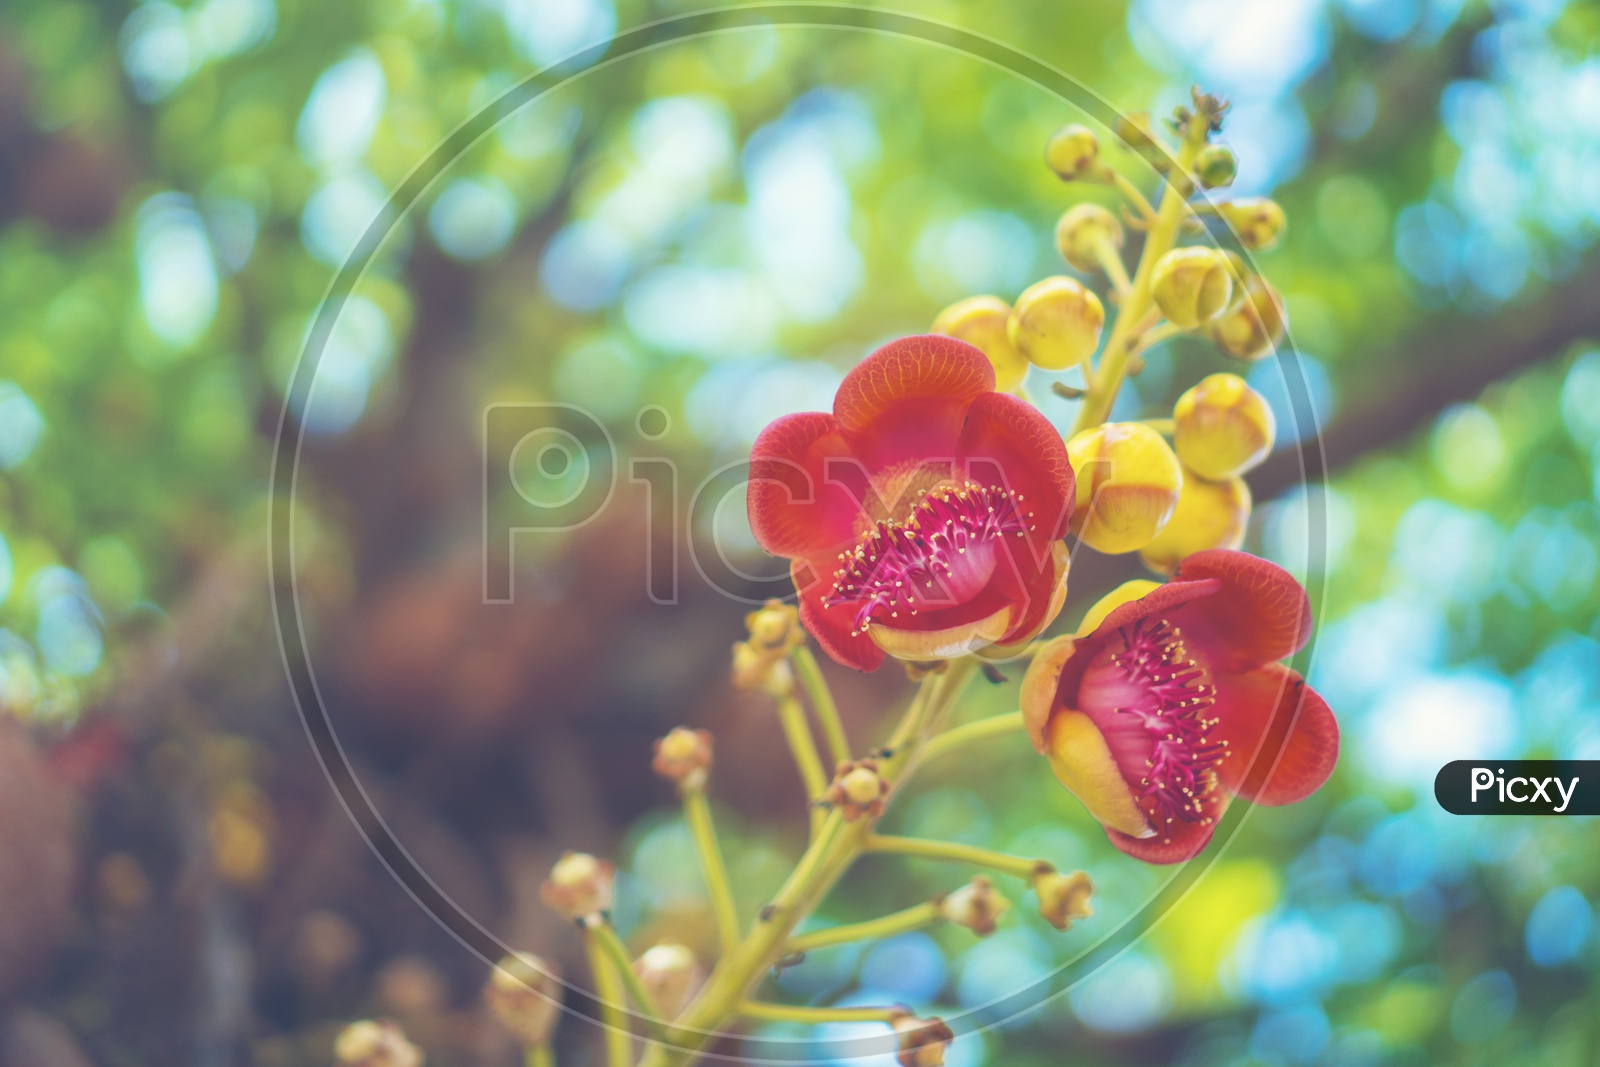 Close up of Shorea robusta flower or Sal tree flower on the tree with nature tree bokeh background